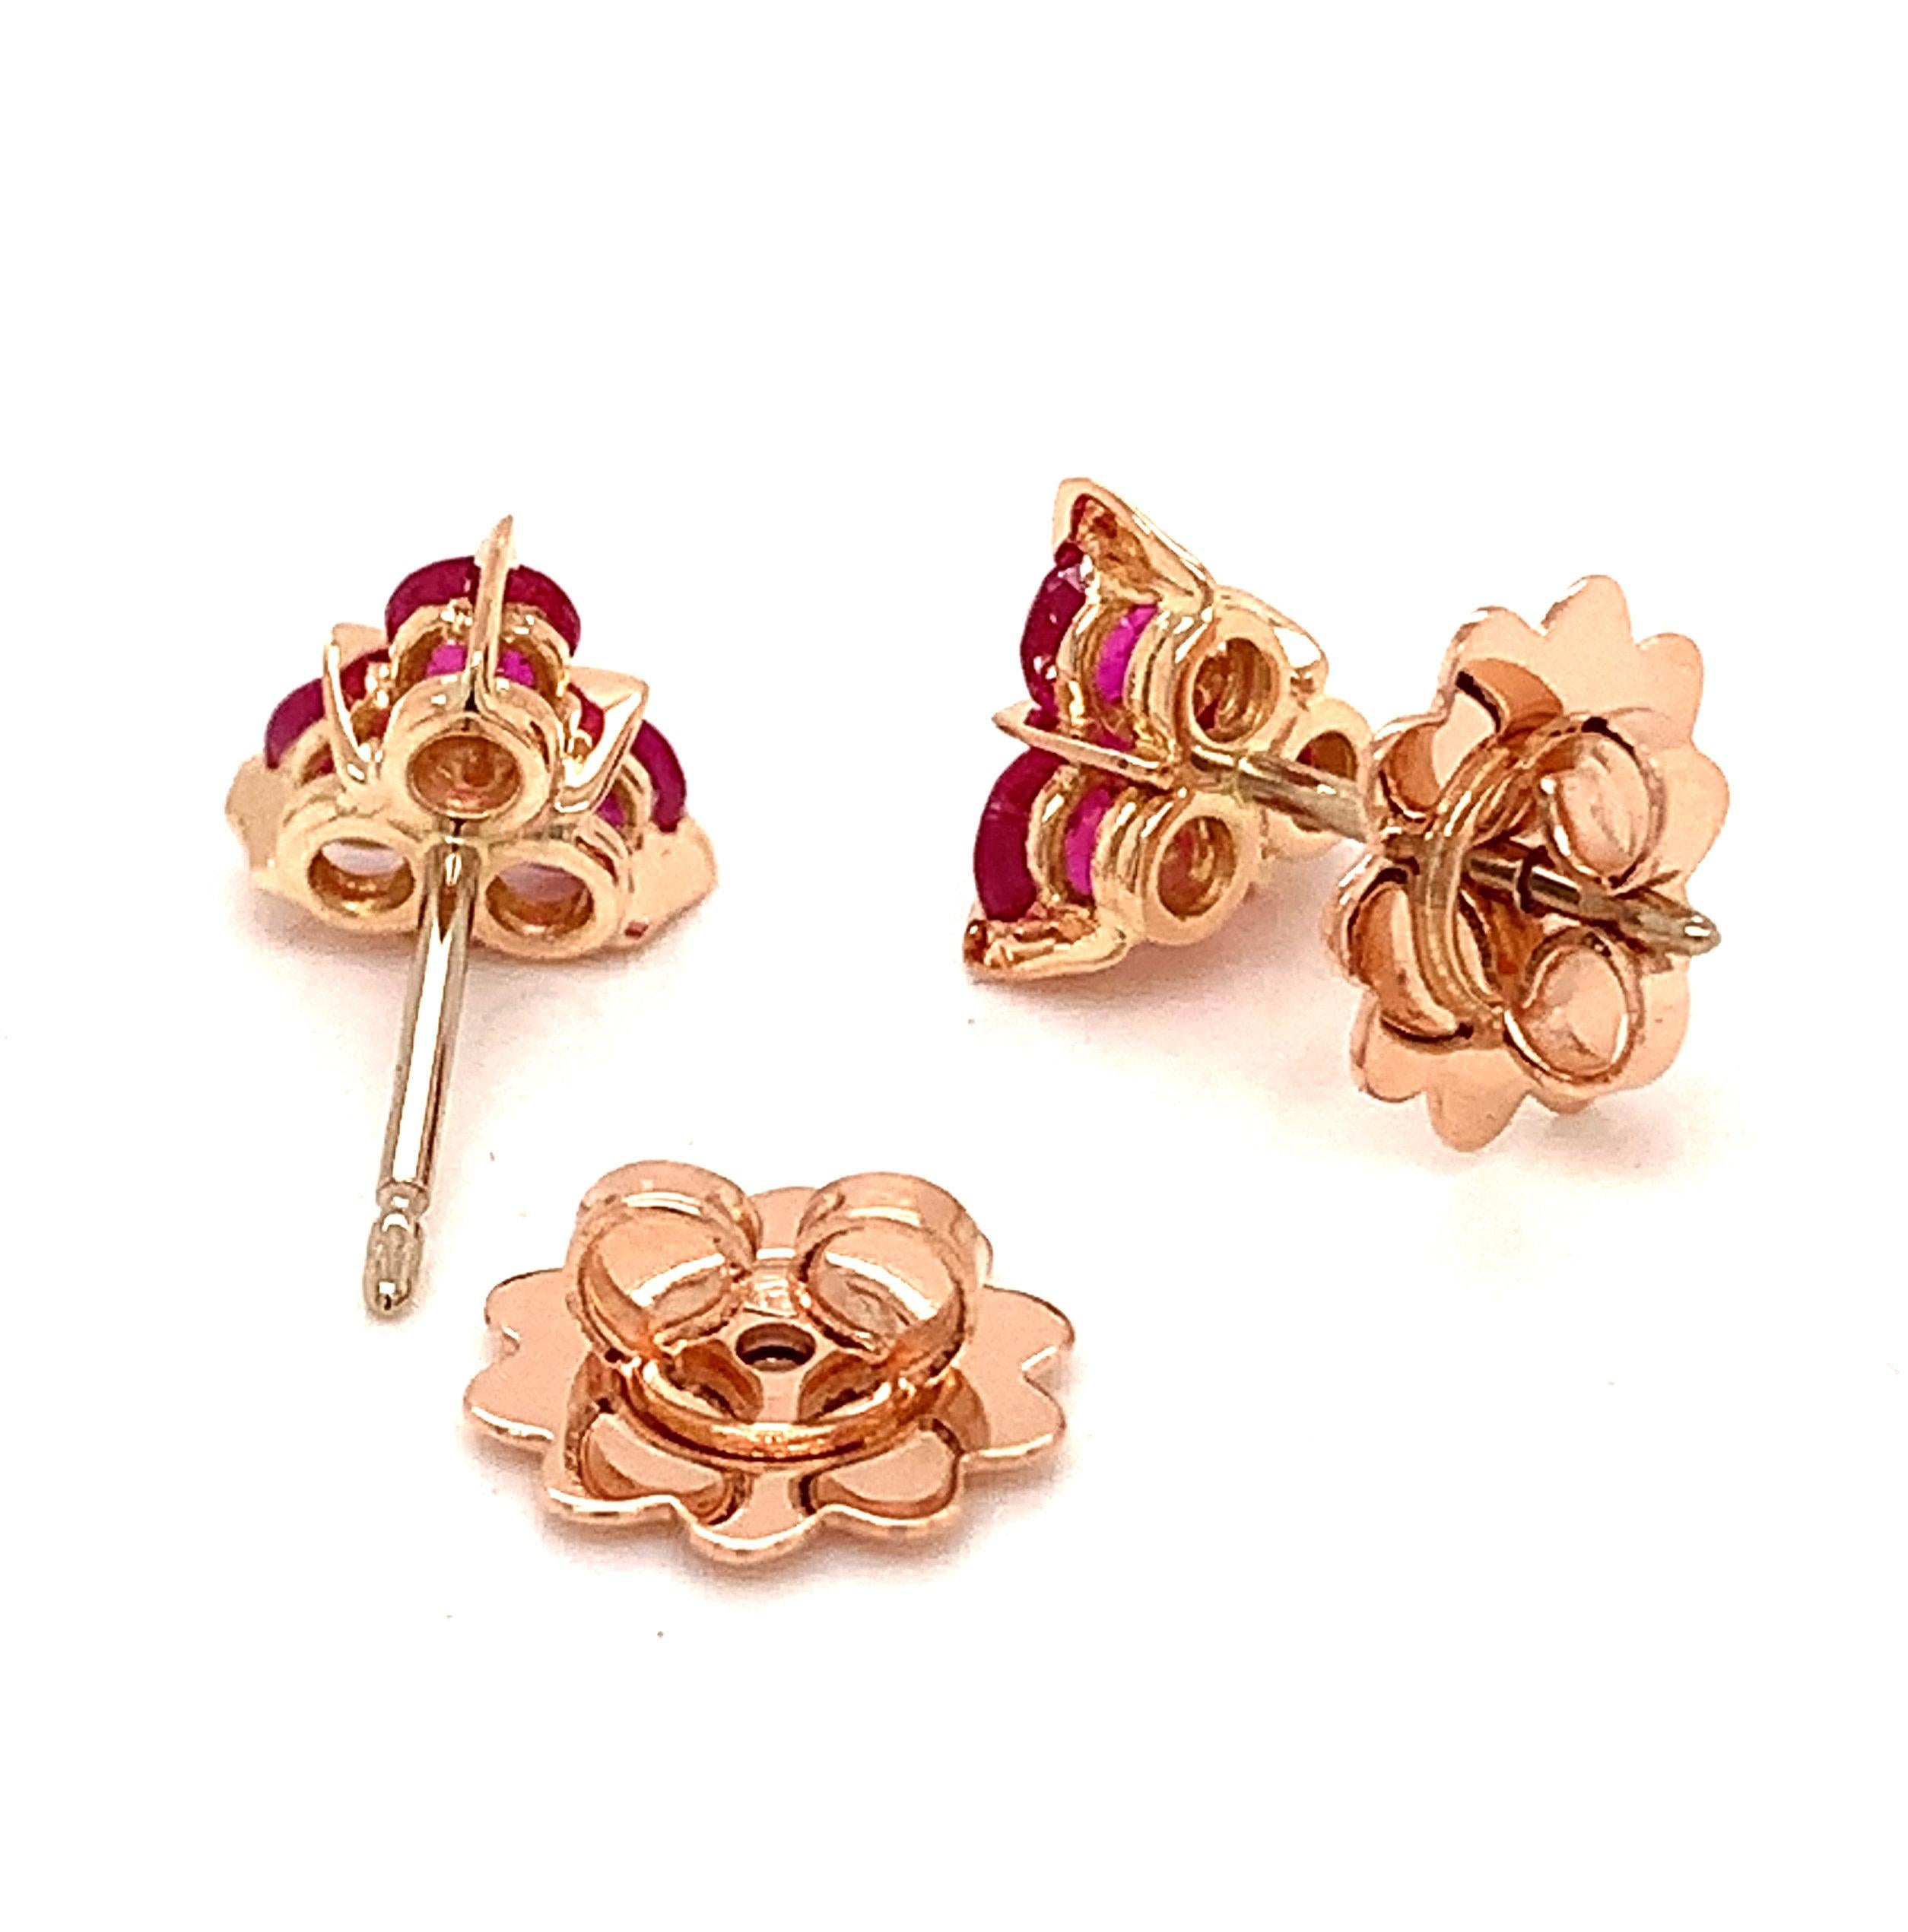 Garavelli earrings in  very unique and pretty design, in pink gold 18 kt with six perfect round pink sapphires to a total carat weight of 1.26
 Available also in diamonds, emeralds, sapphires, rubies. Matching pendant  available.
GOLD grs : 3,00
